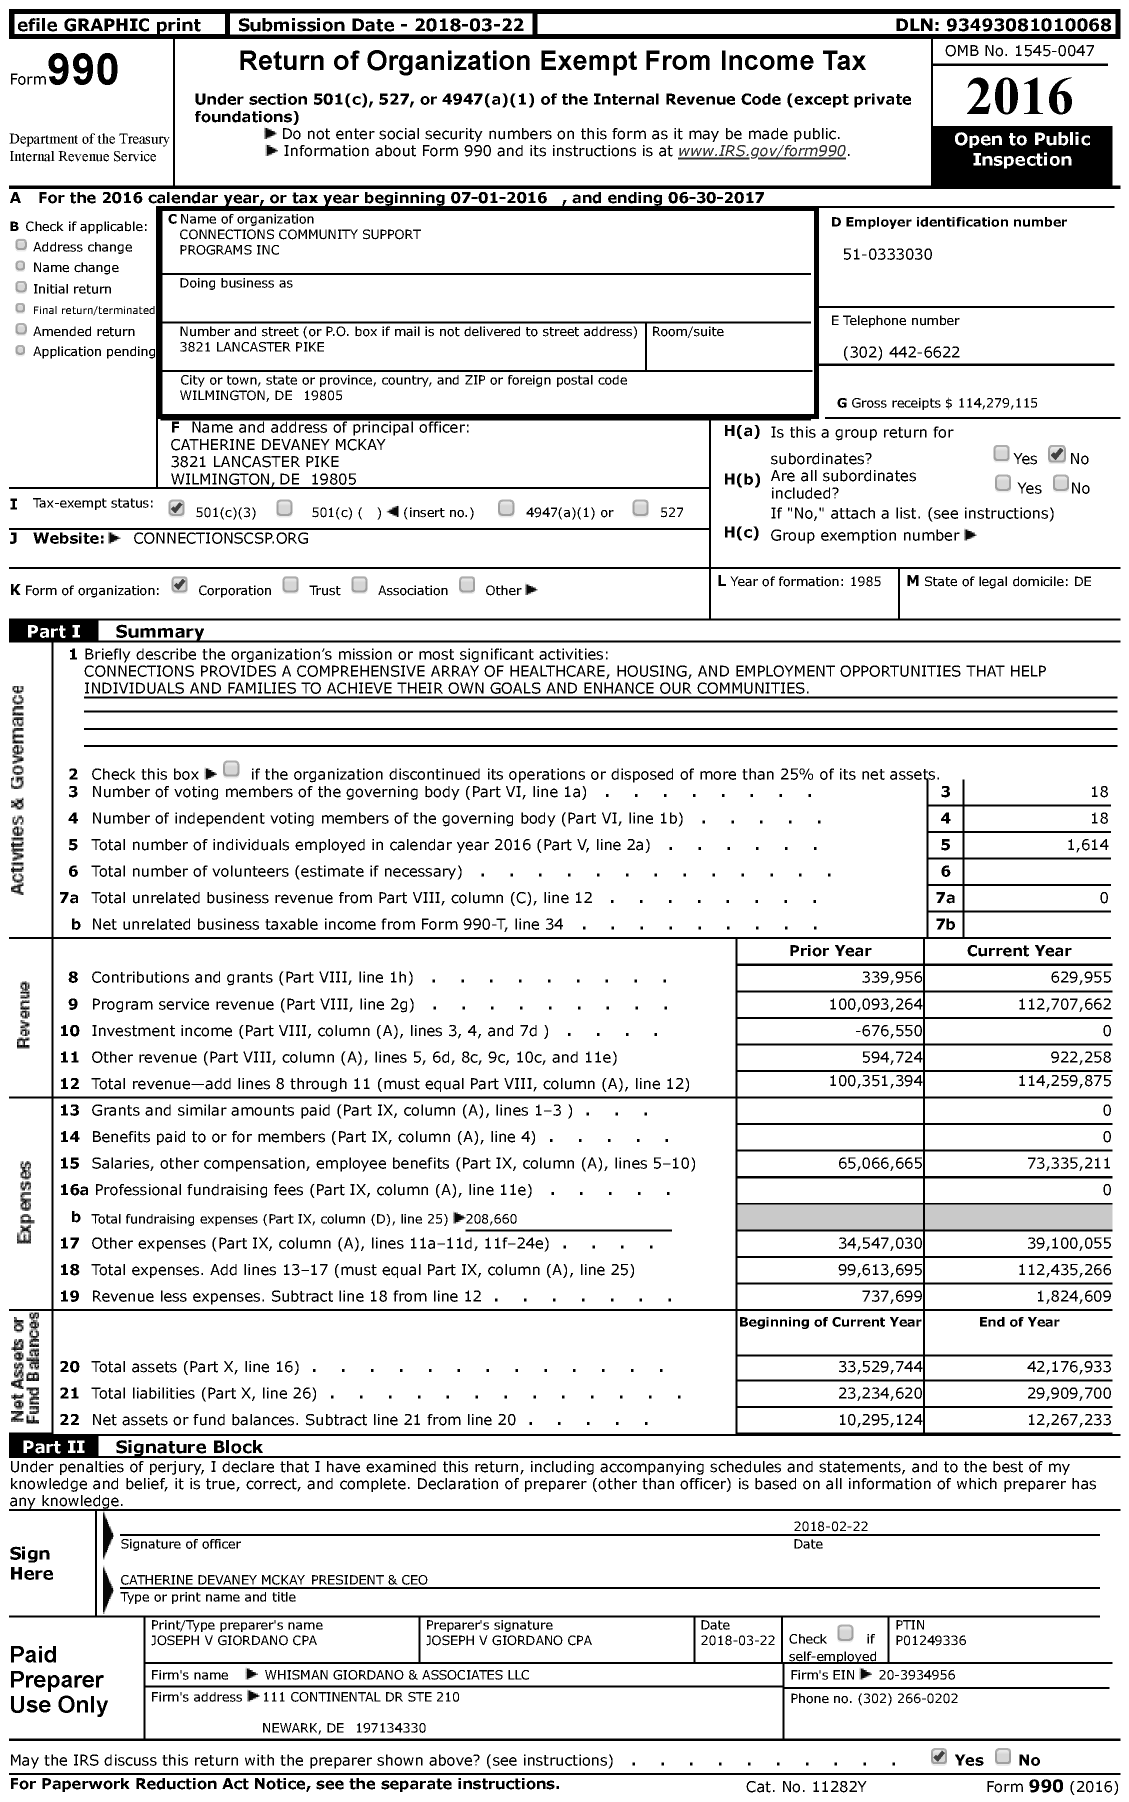 Image of first page of 2016 Form 990 for Connections Community Support Programs